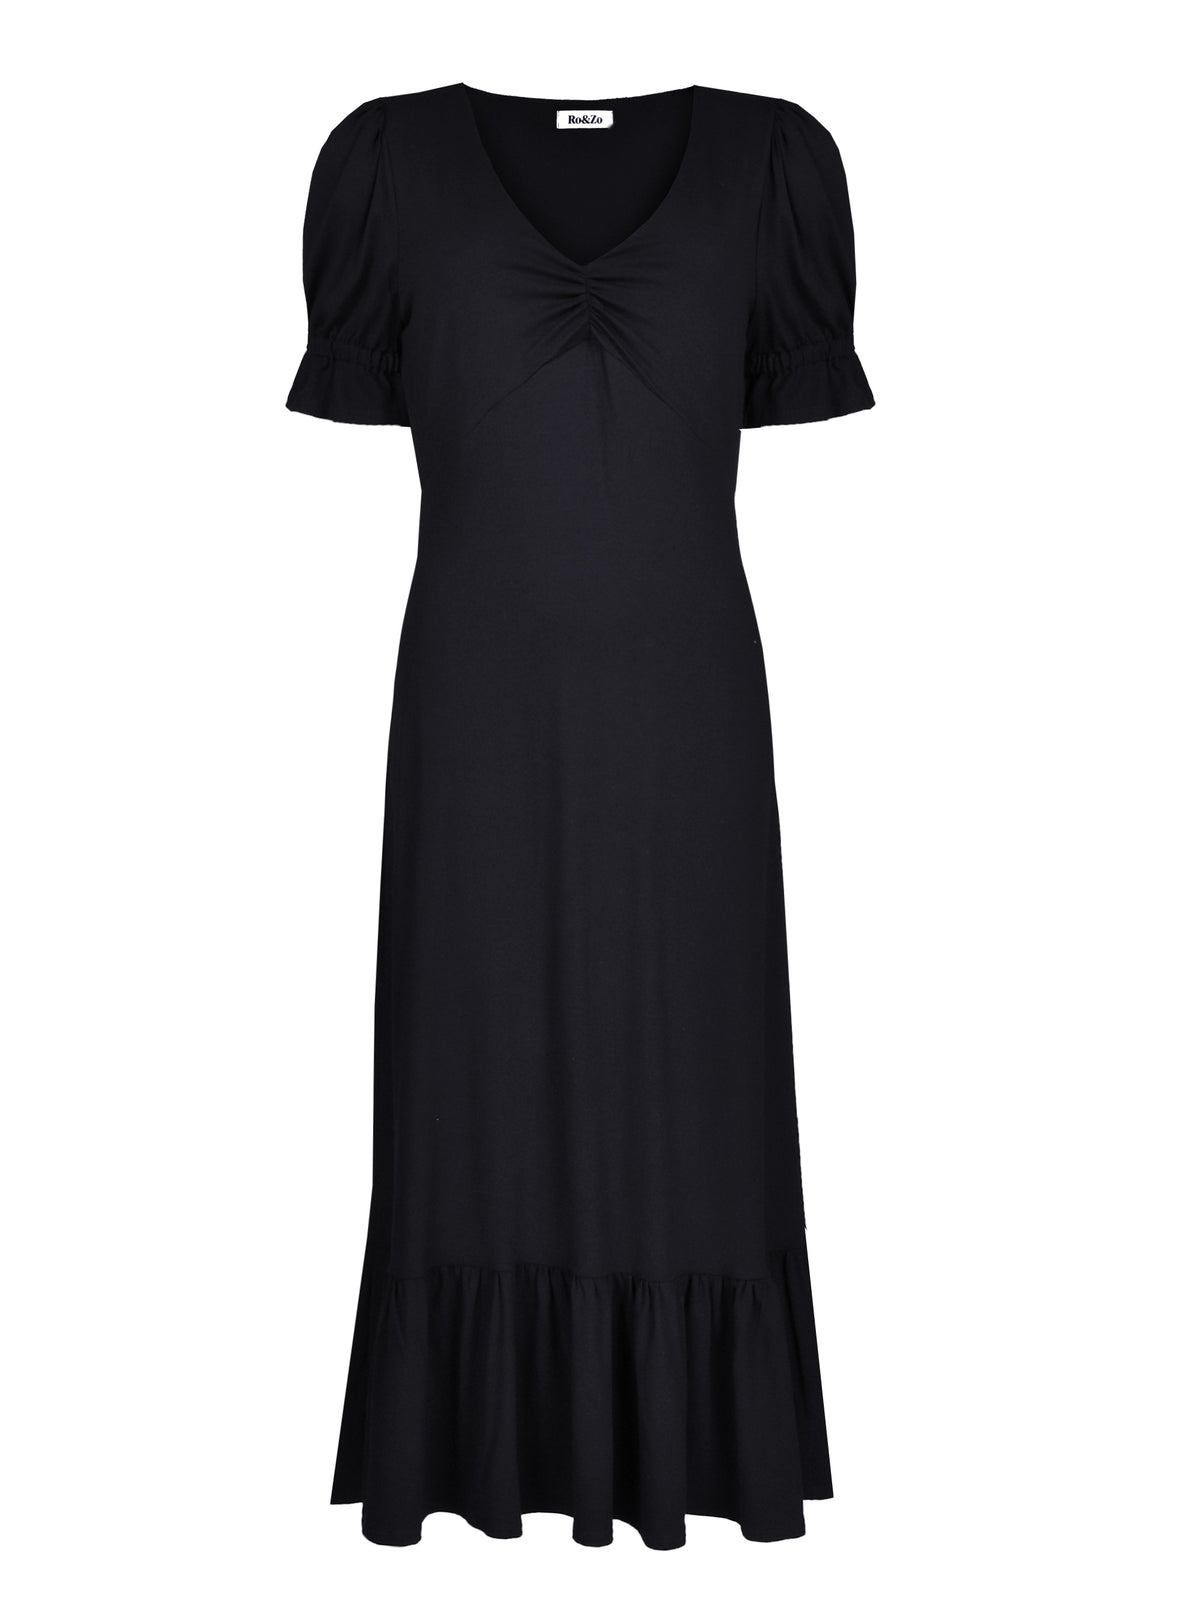 Black Ruched Jersey Dress